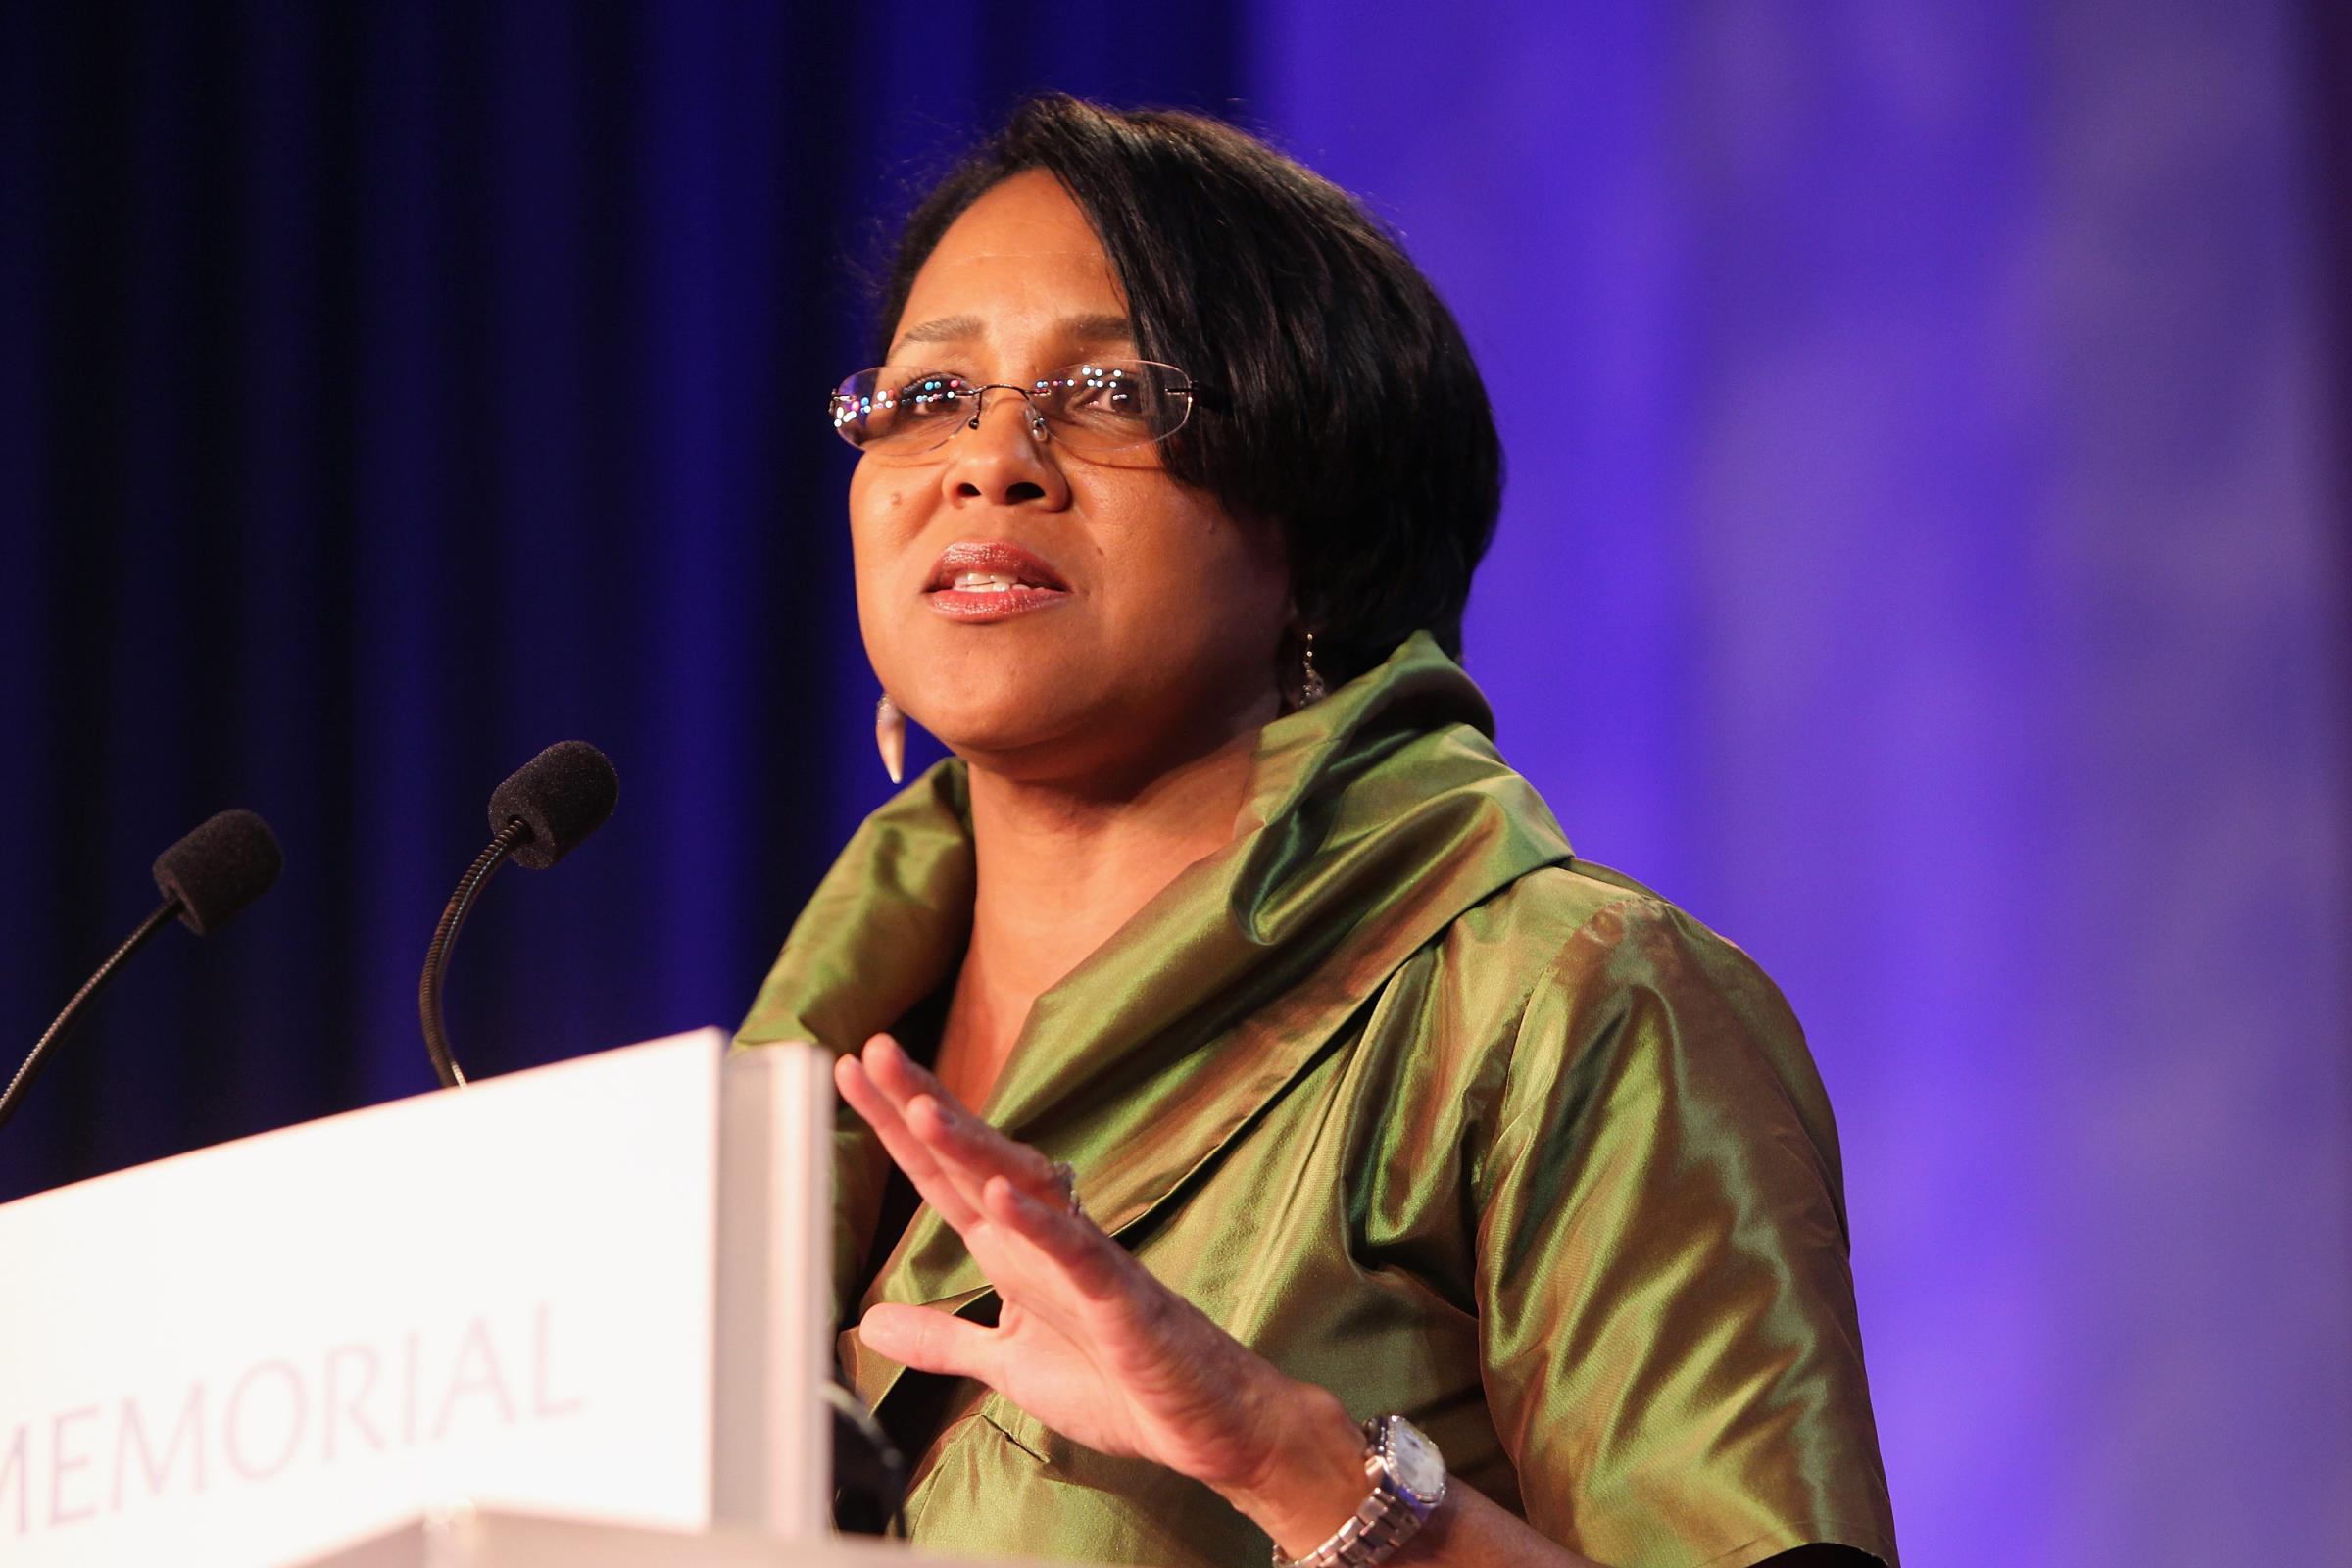 Rosalind Brewer at the Martin Luther King, Jr. Memorial Dream Gala in Washington on Oct. 15, 2011.